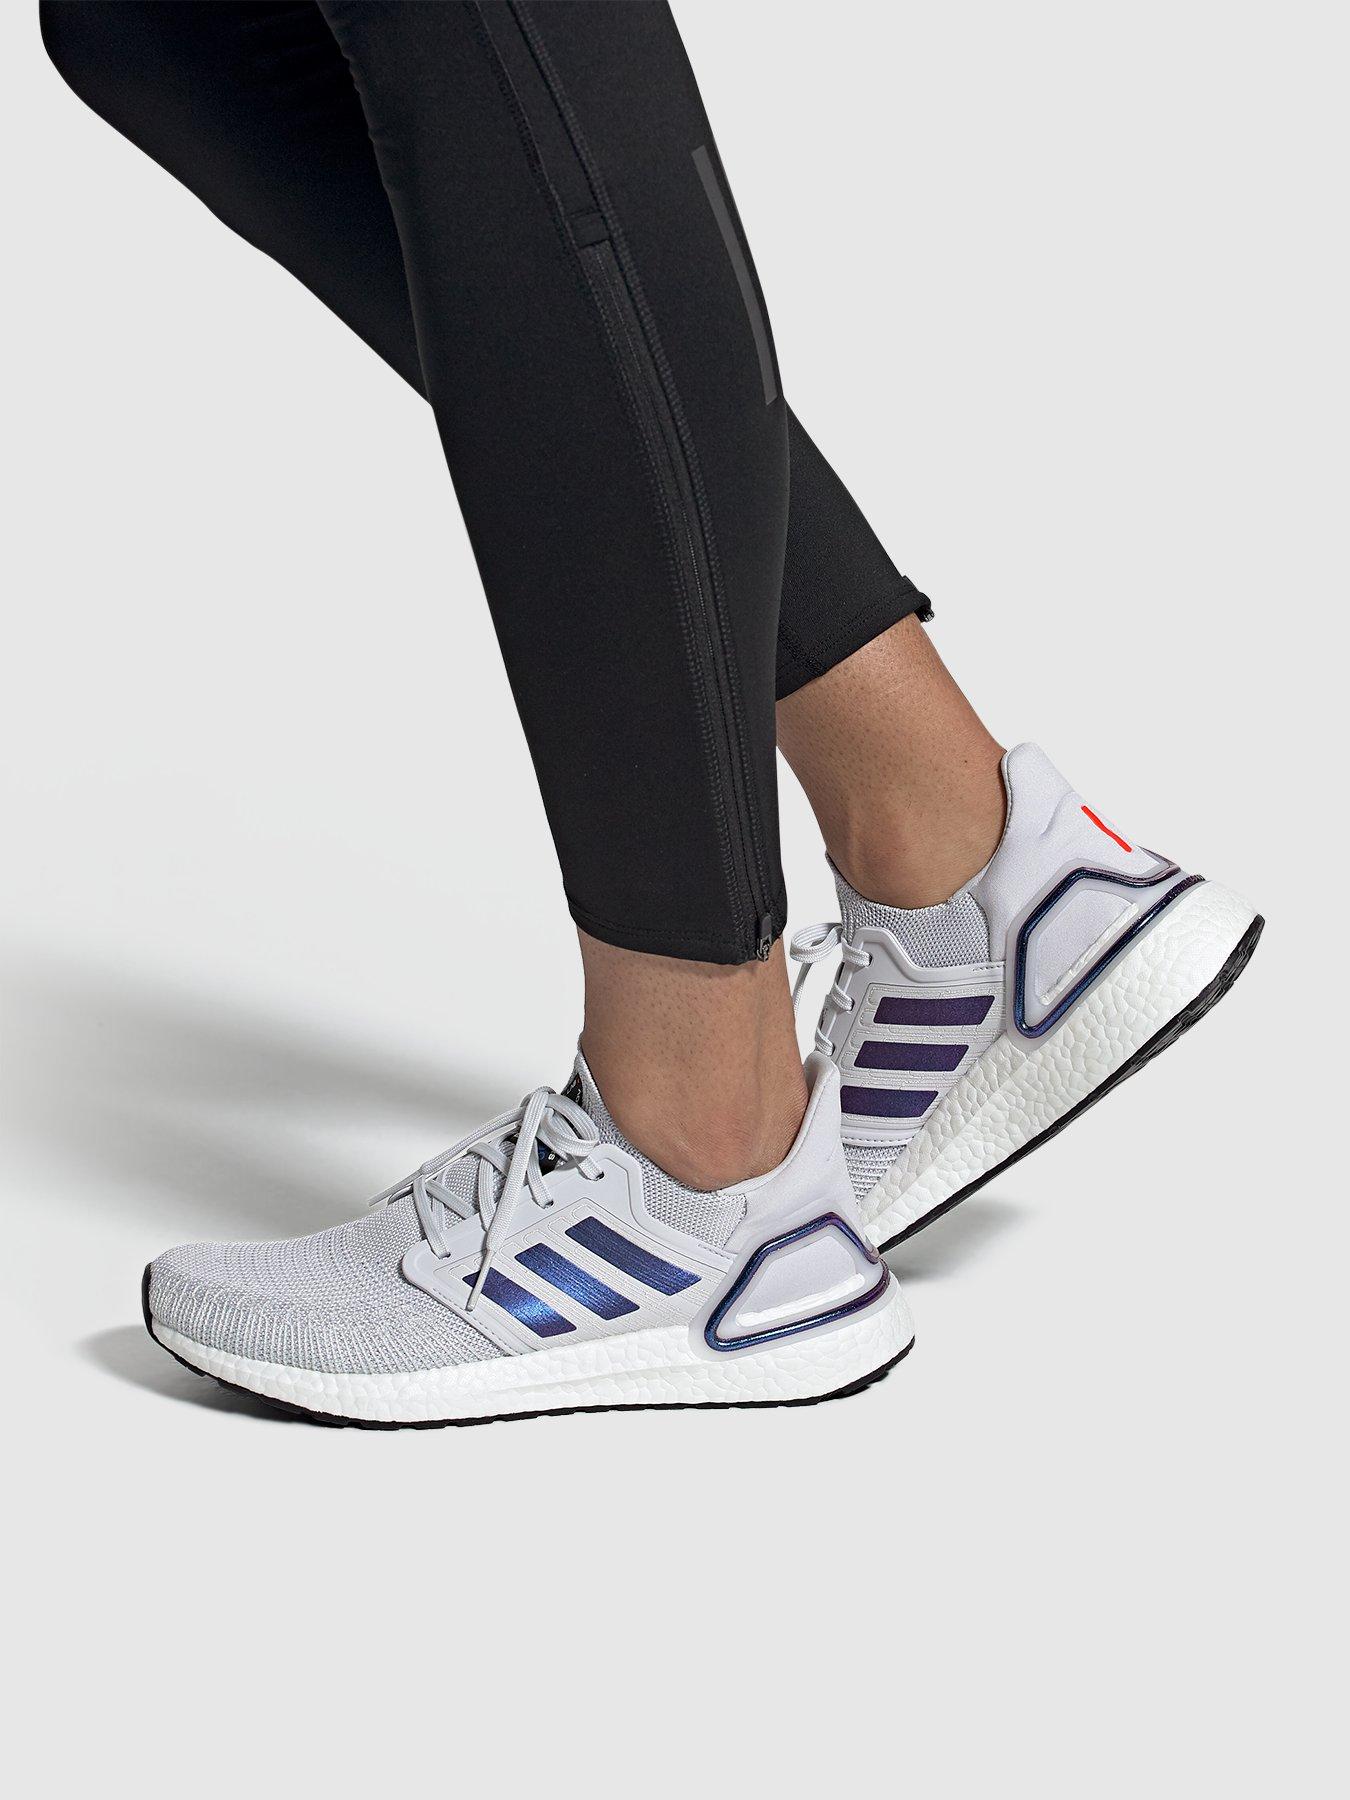 Get Adidas Ultra Boost 20 Womens 75 Images